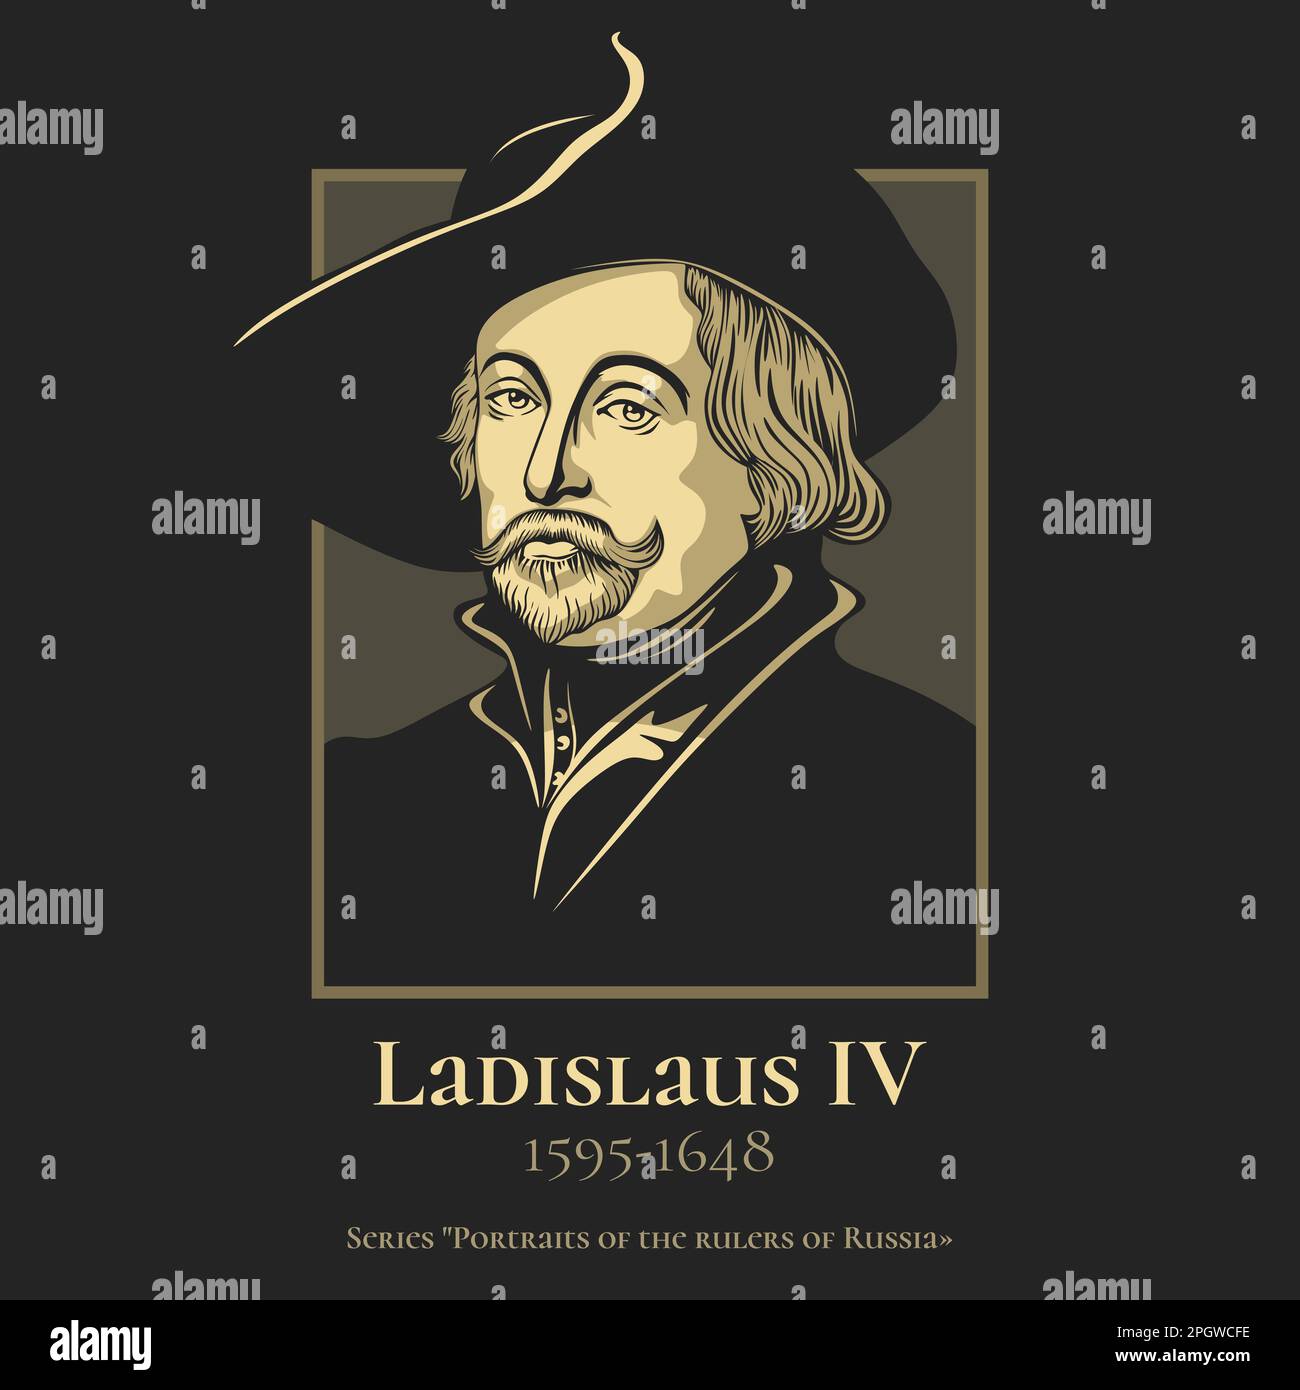 Ladislaus IV (1595-1648) was King of Poland, Grand Duke of Lithuania and claimant of the thrones of Sweden and Russia. Stock Vector